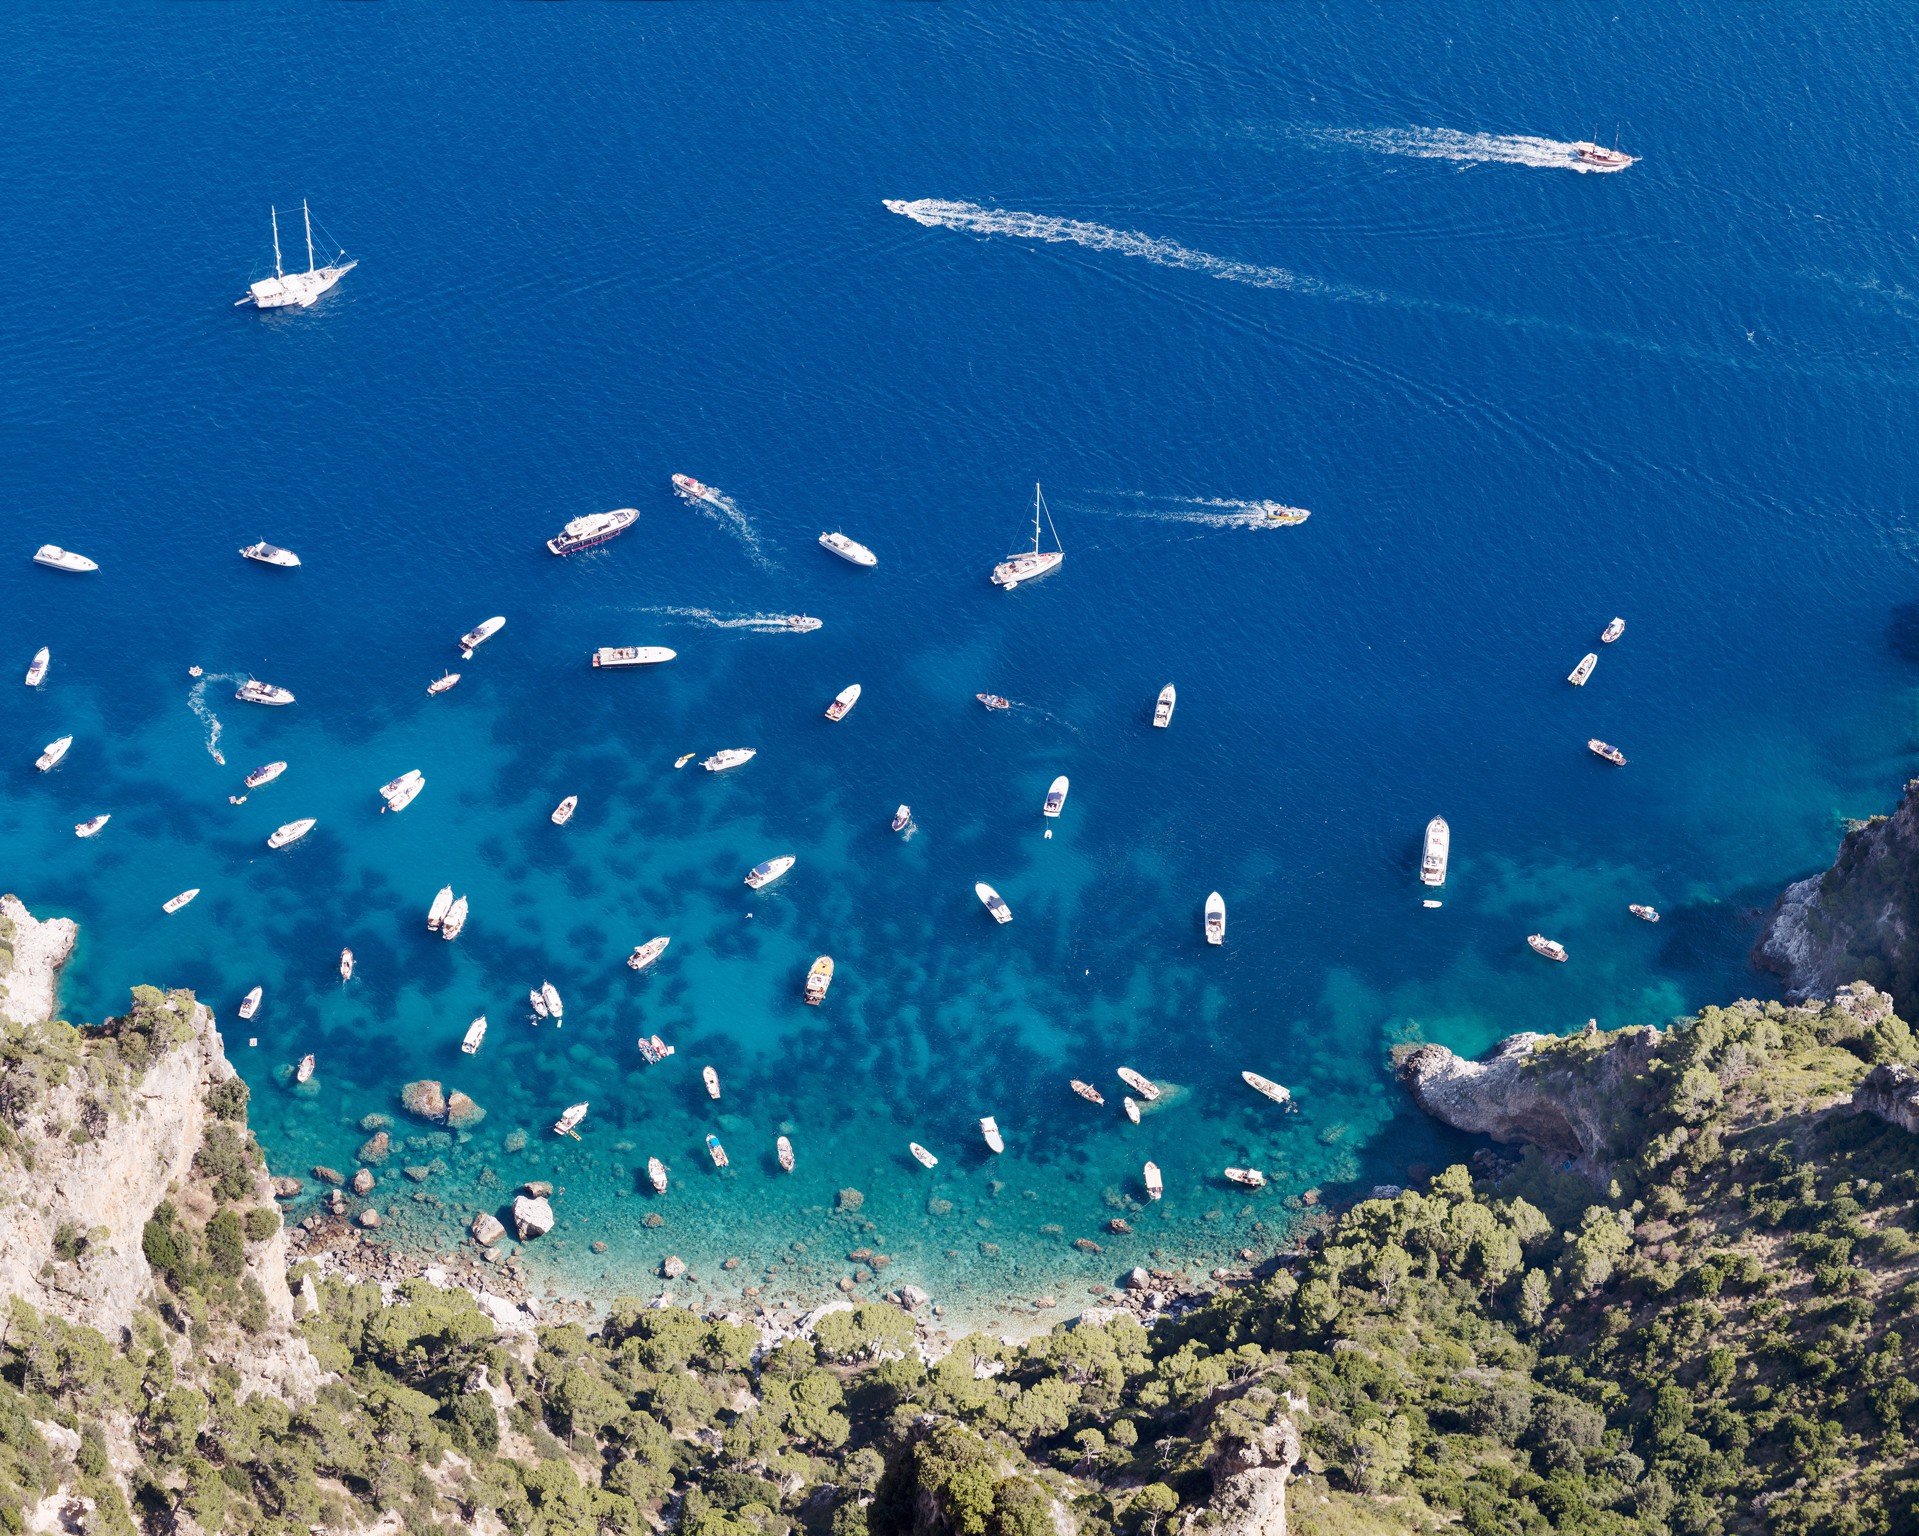 Yachts from Monte Solaro by Jonathan Smith